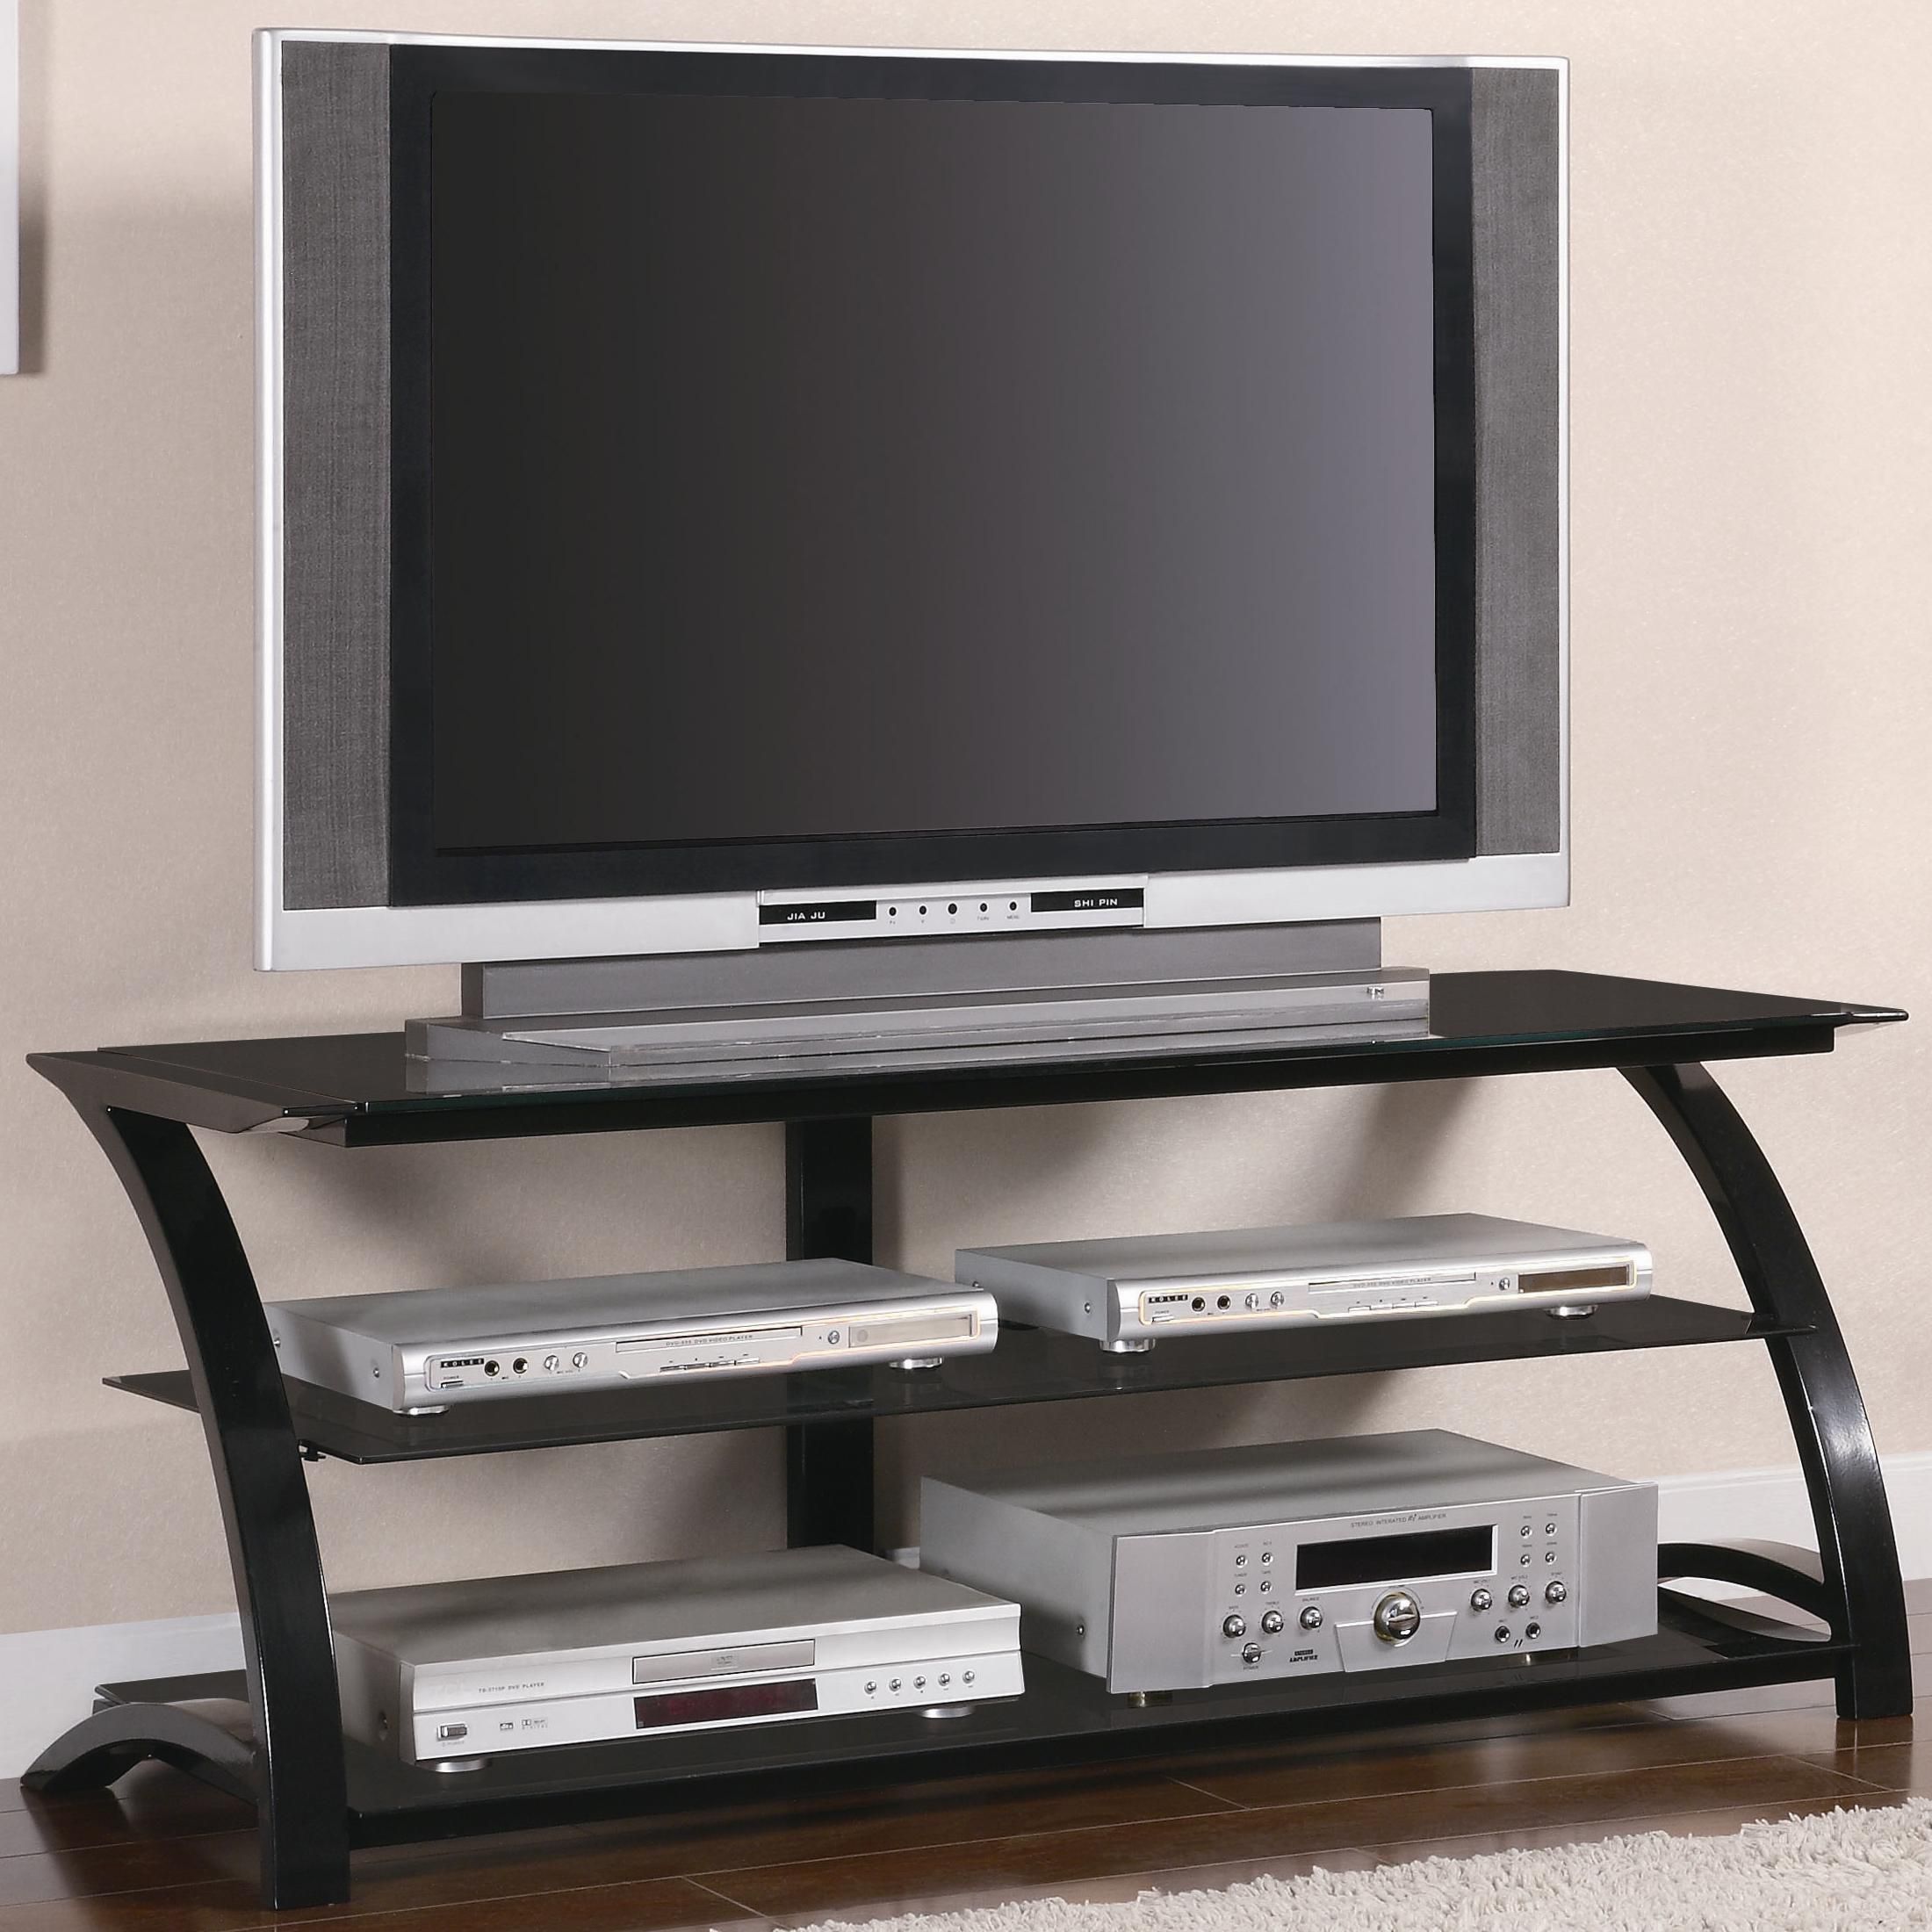 Coaster Tv Stands 700664 Contemporary Metal And Glass Pertaining To Glass Front Tv Stands (View 10 of 15)